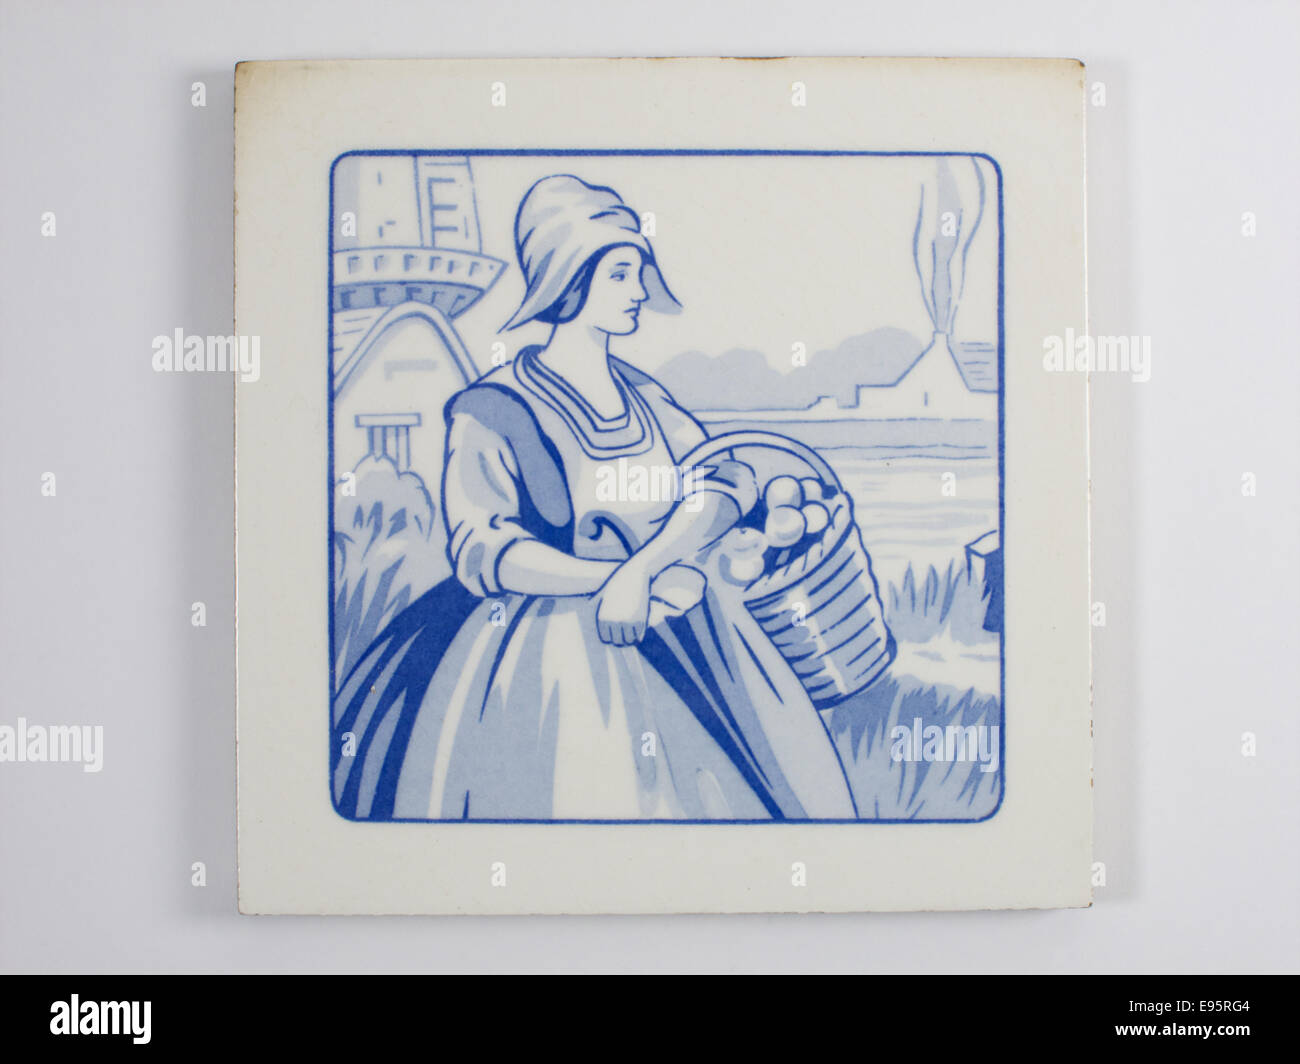 Carter Poole ‘Dutch Scenes’ tile designed by Joseph Roelants. The tile measures approximately 6 inches Stock Photo